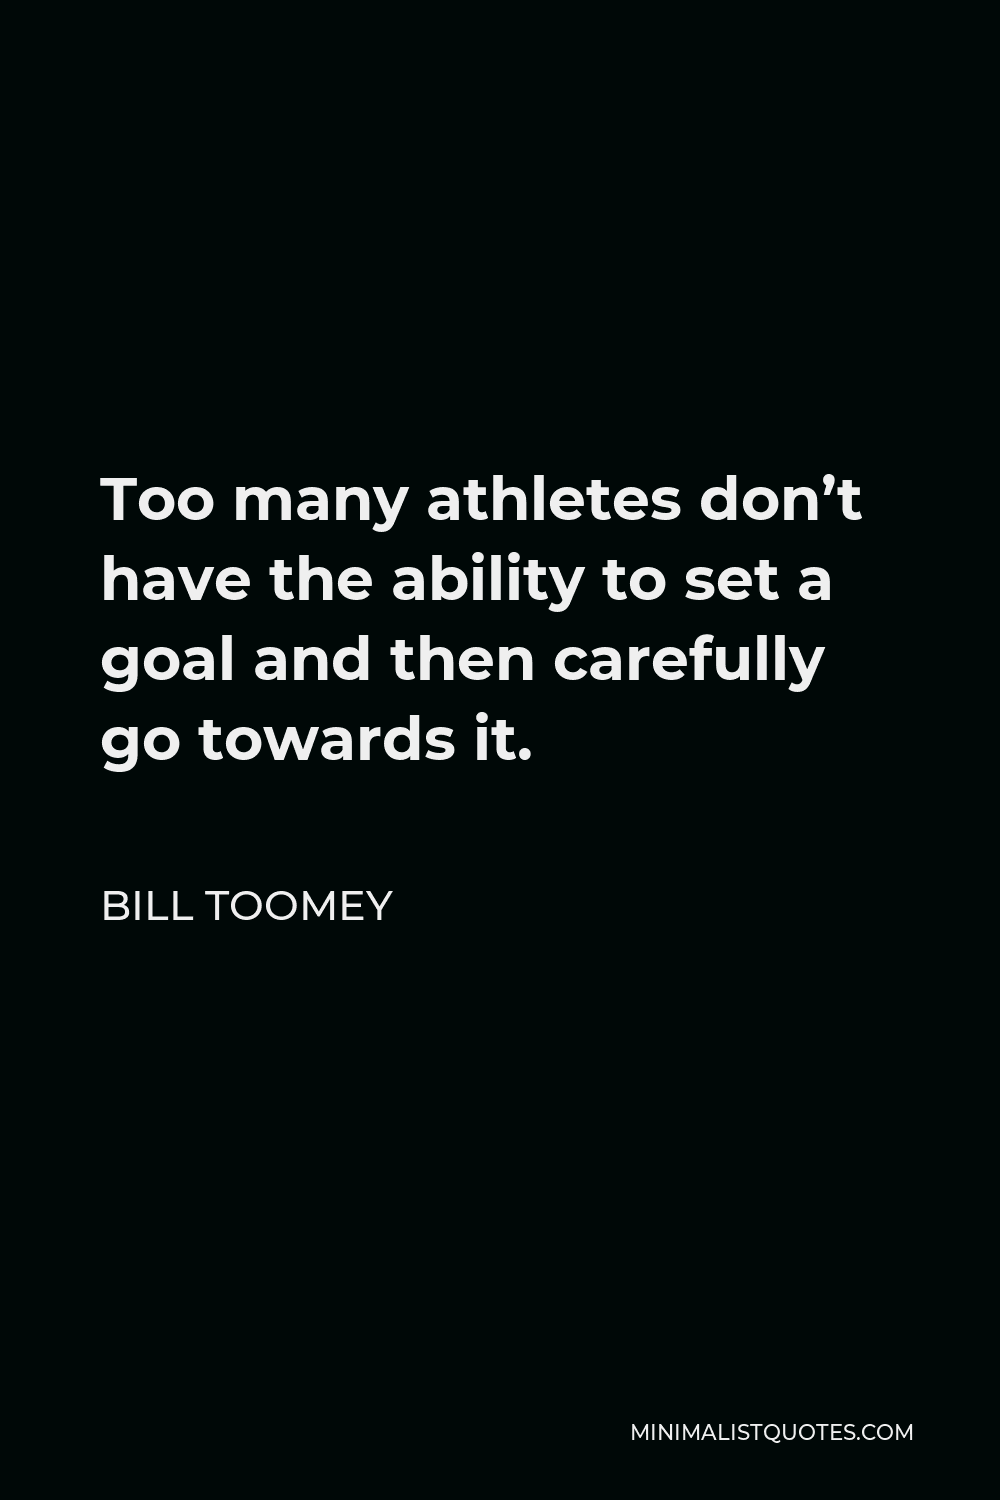 Bill Toomey Quote - Too many athletes don’t have the ability to set a goal and then carefully go towards it.